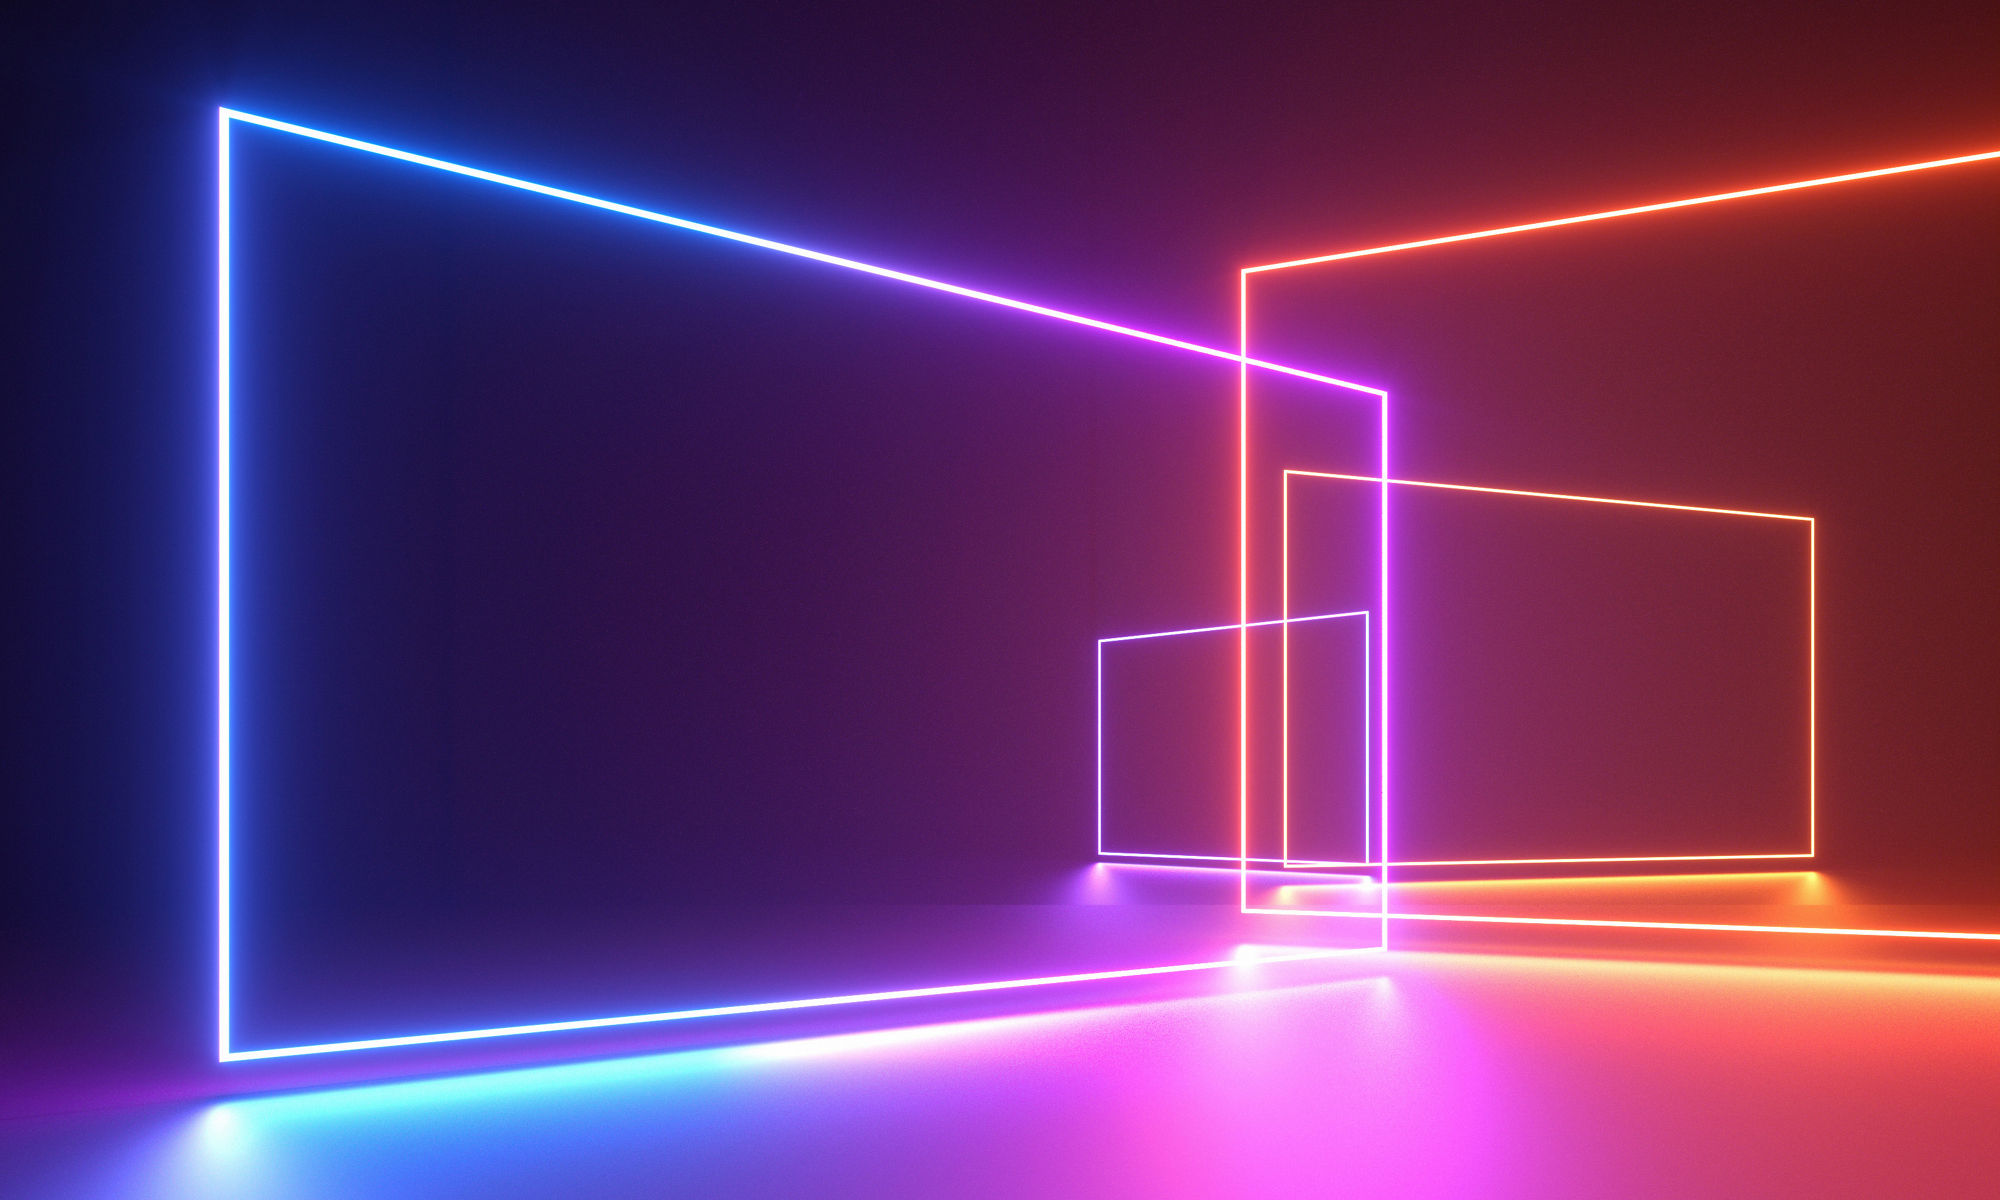 data center with neon pink and blue lights